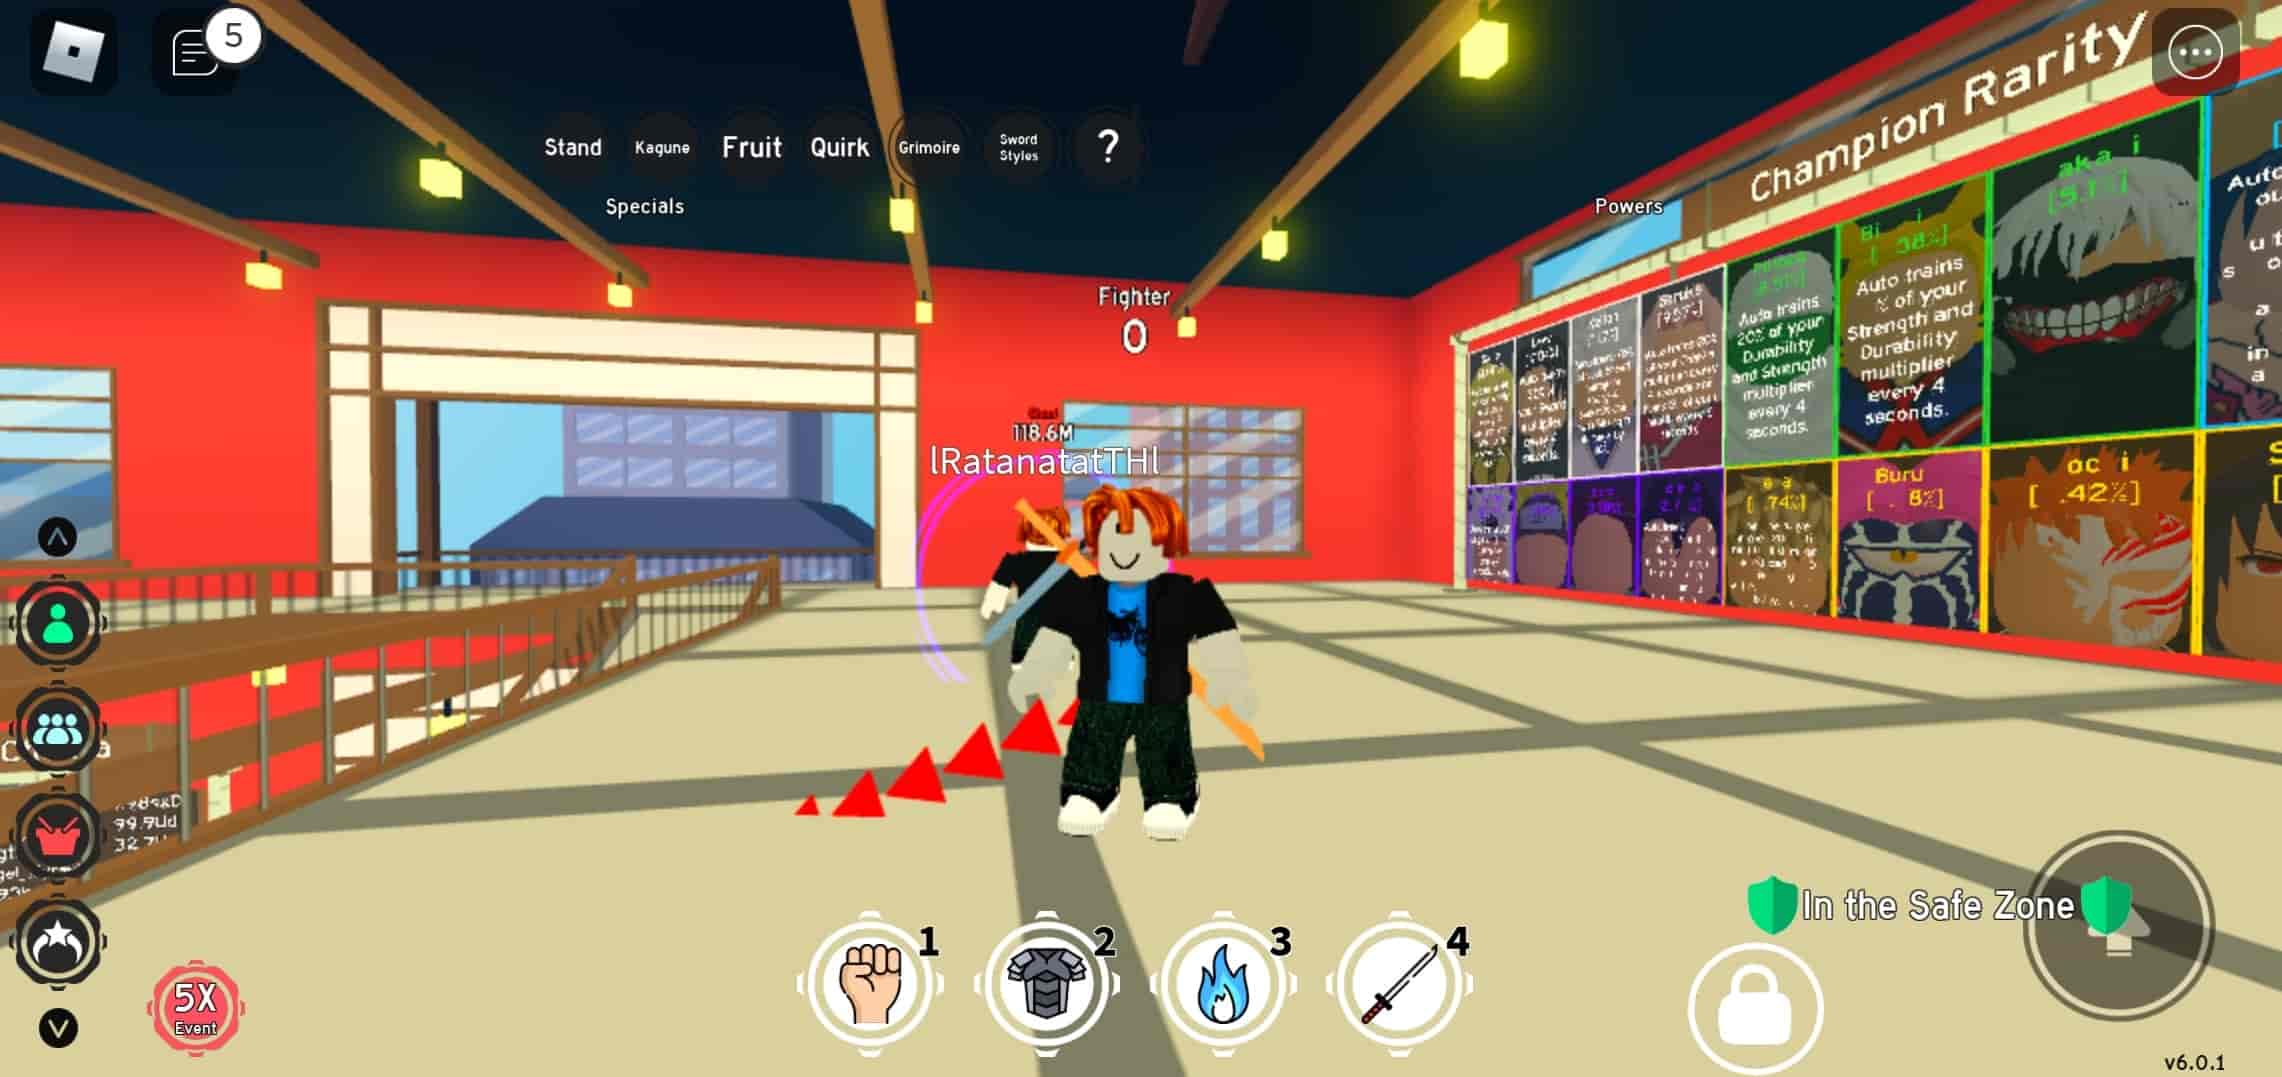 Roblox Studio Apk V5 3 Mod Download For Android - roblox studio app download apk